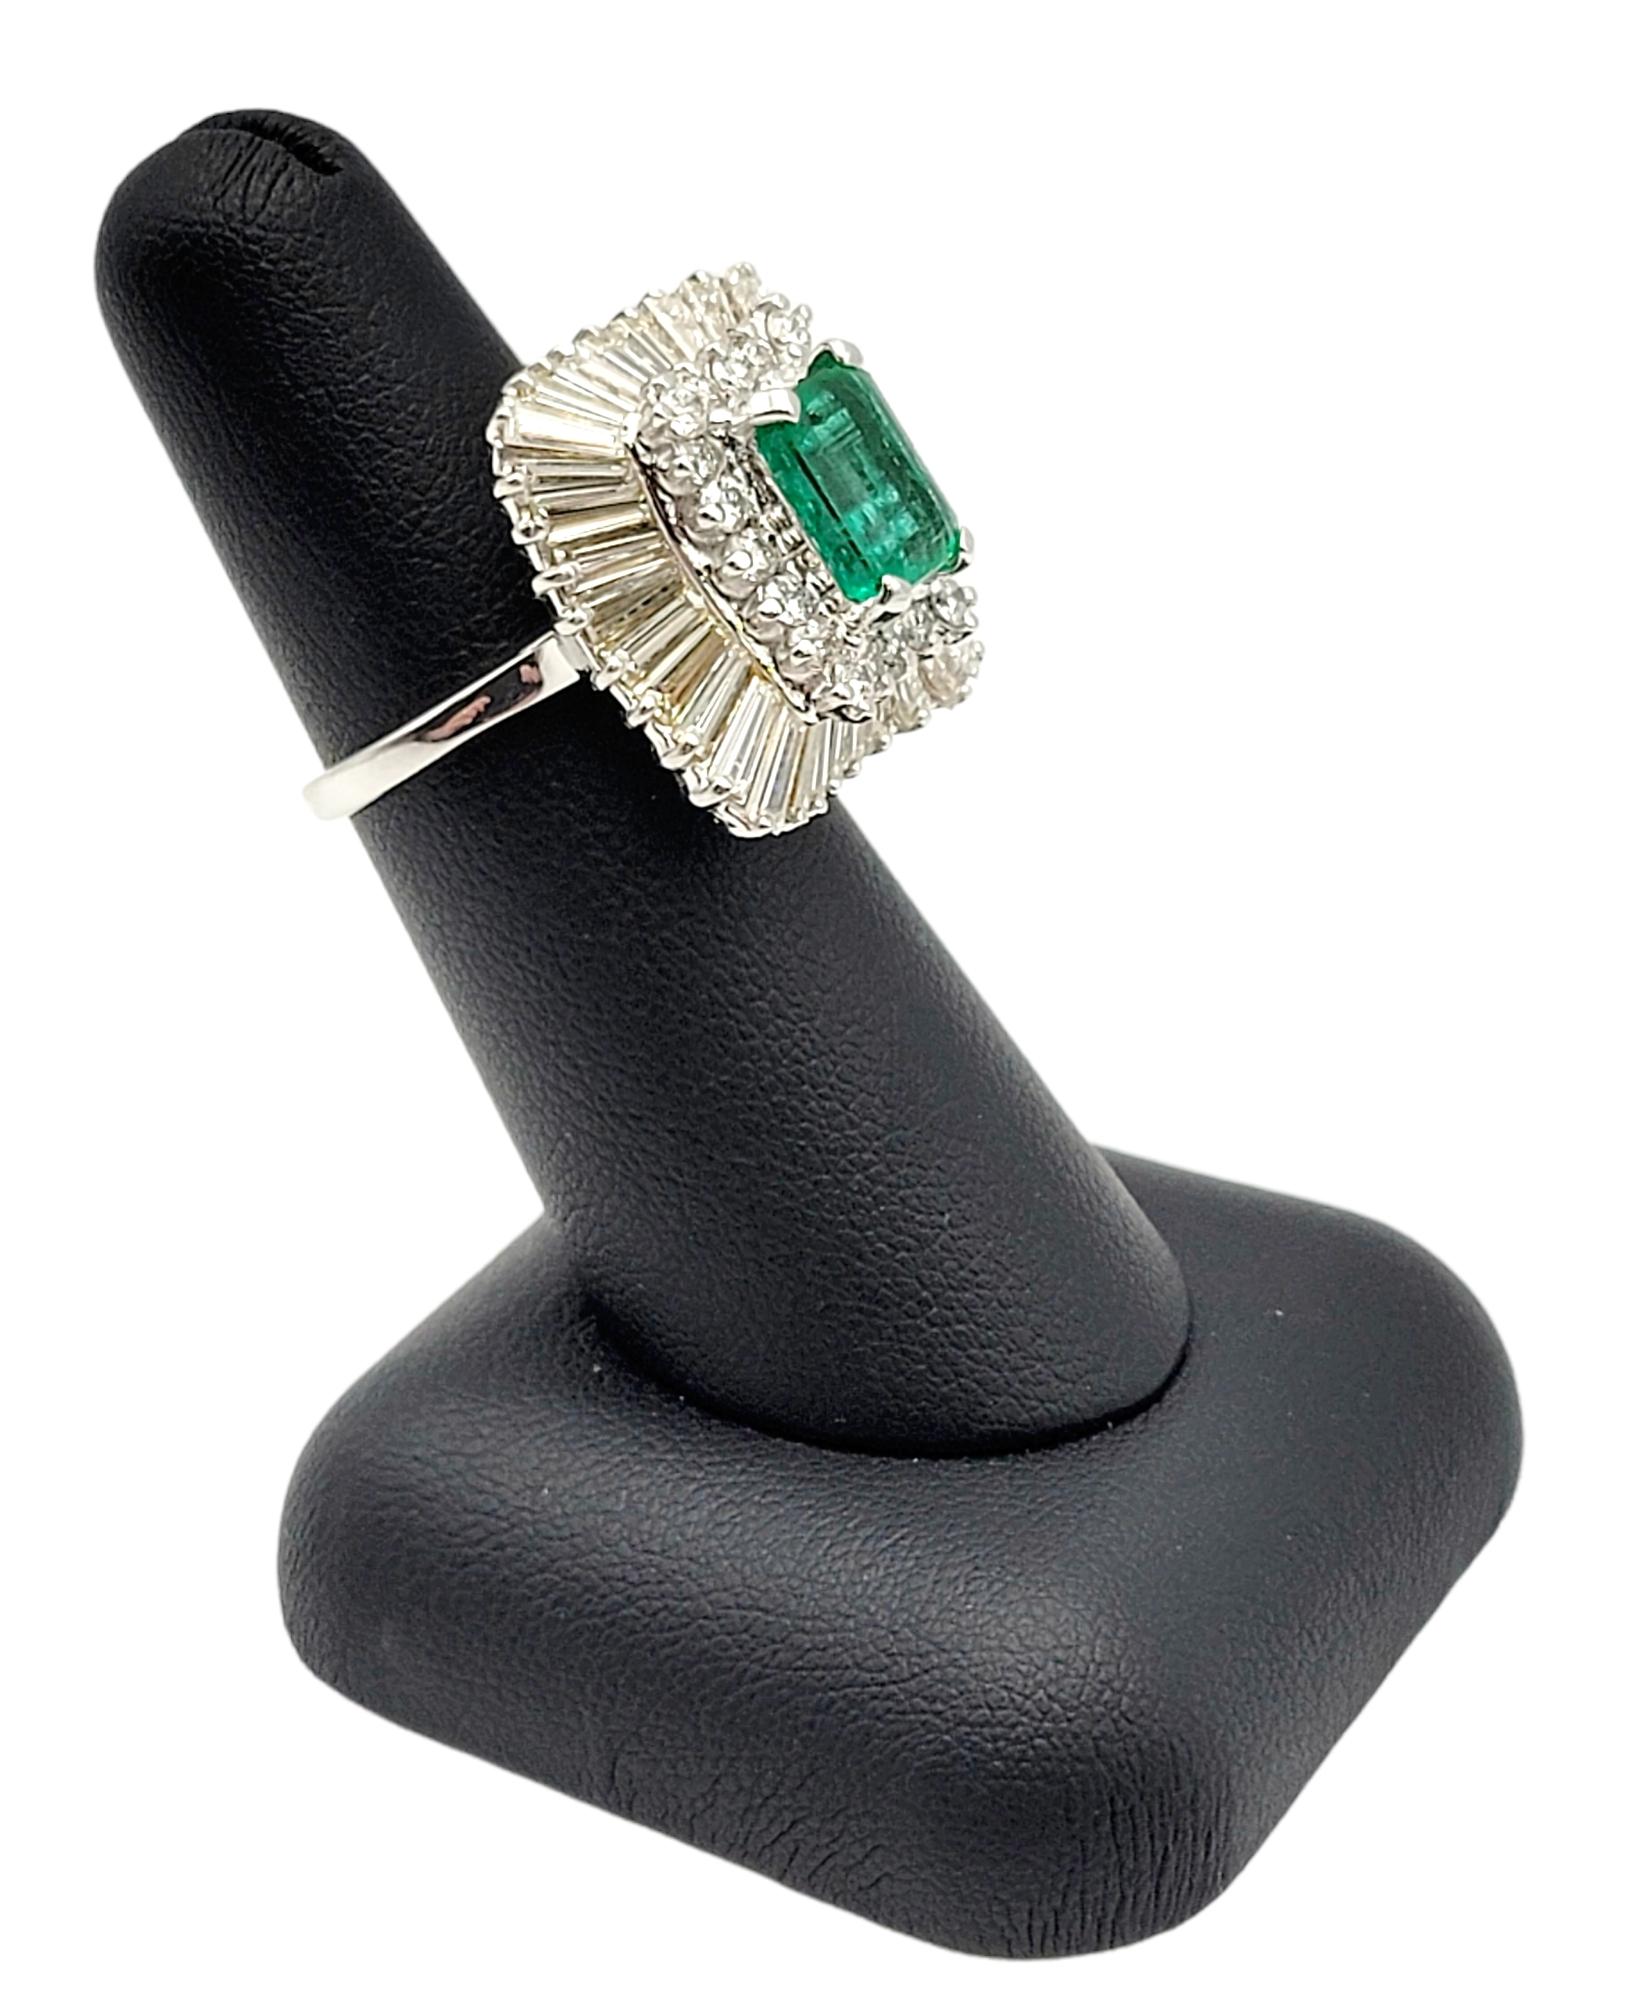 3.07 Carats Total Emerald Cut Emerald and Diamond Cocktail Ring 14 Karat Gold For Sale 3